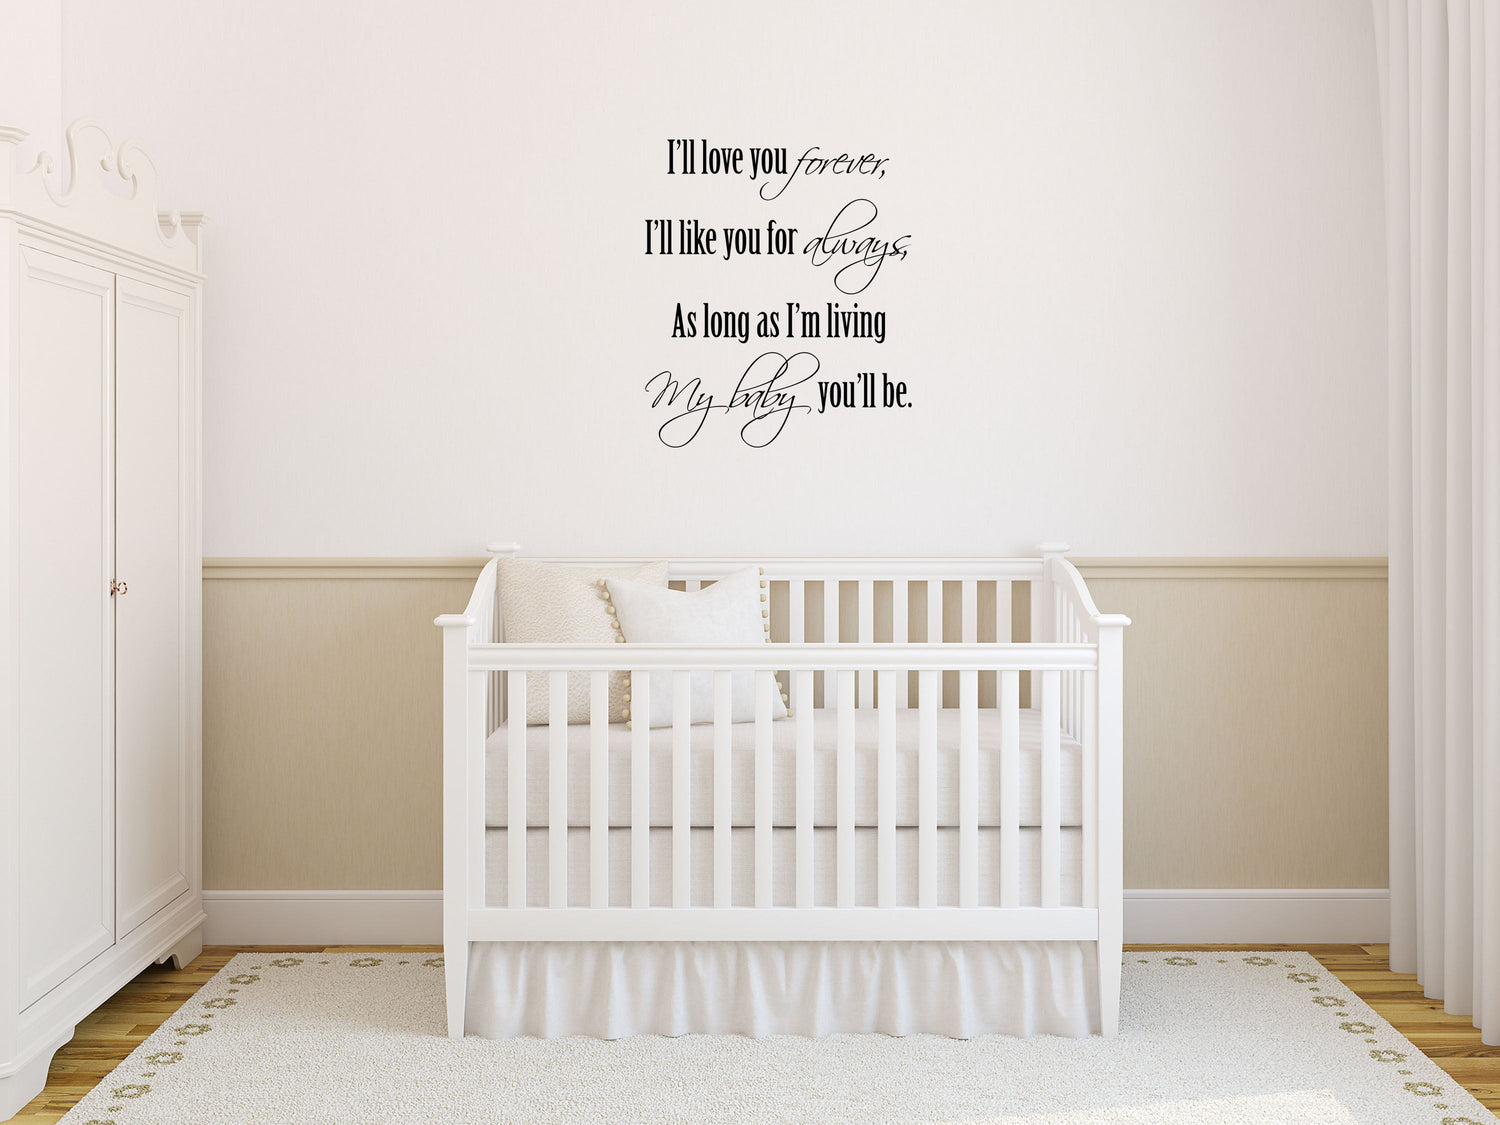 I'll Love You Forever - Christian Wall Art - Wall Decal - Baby Wall Art - Nursery - Kid Wall Decals - Baby Handmade - Nursery Wall Quote Vinyl Wall Decal Inspirational Wall Signs 